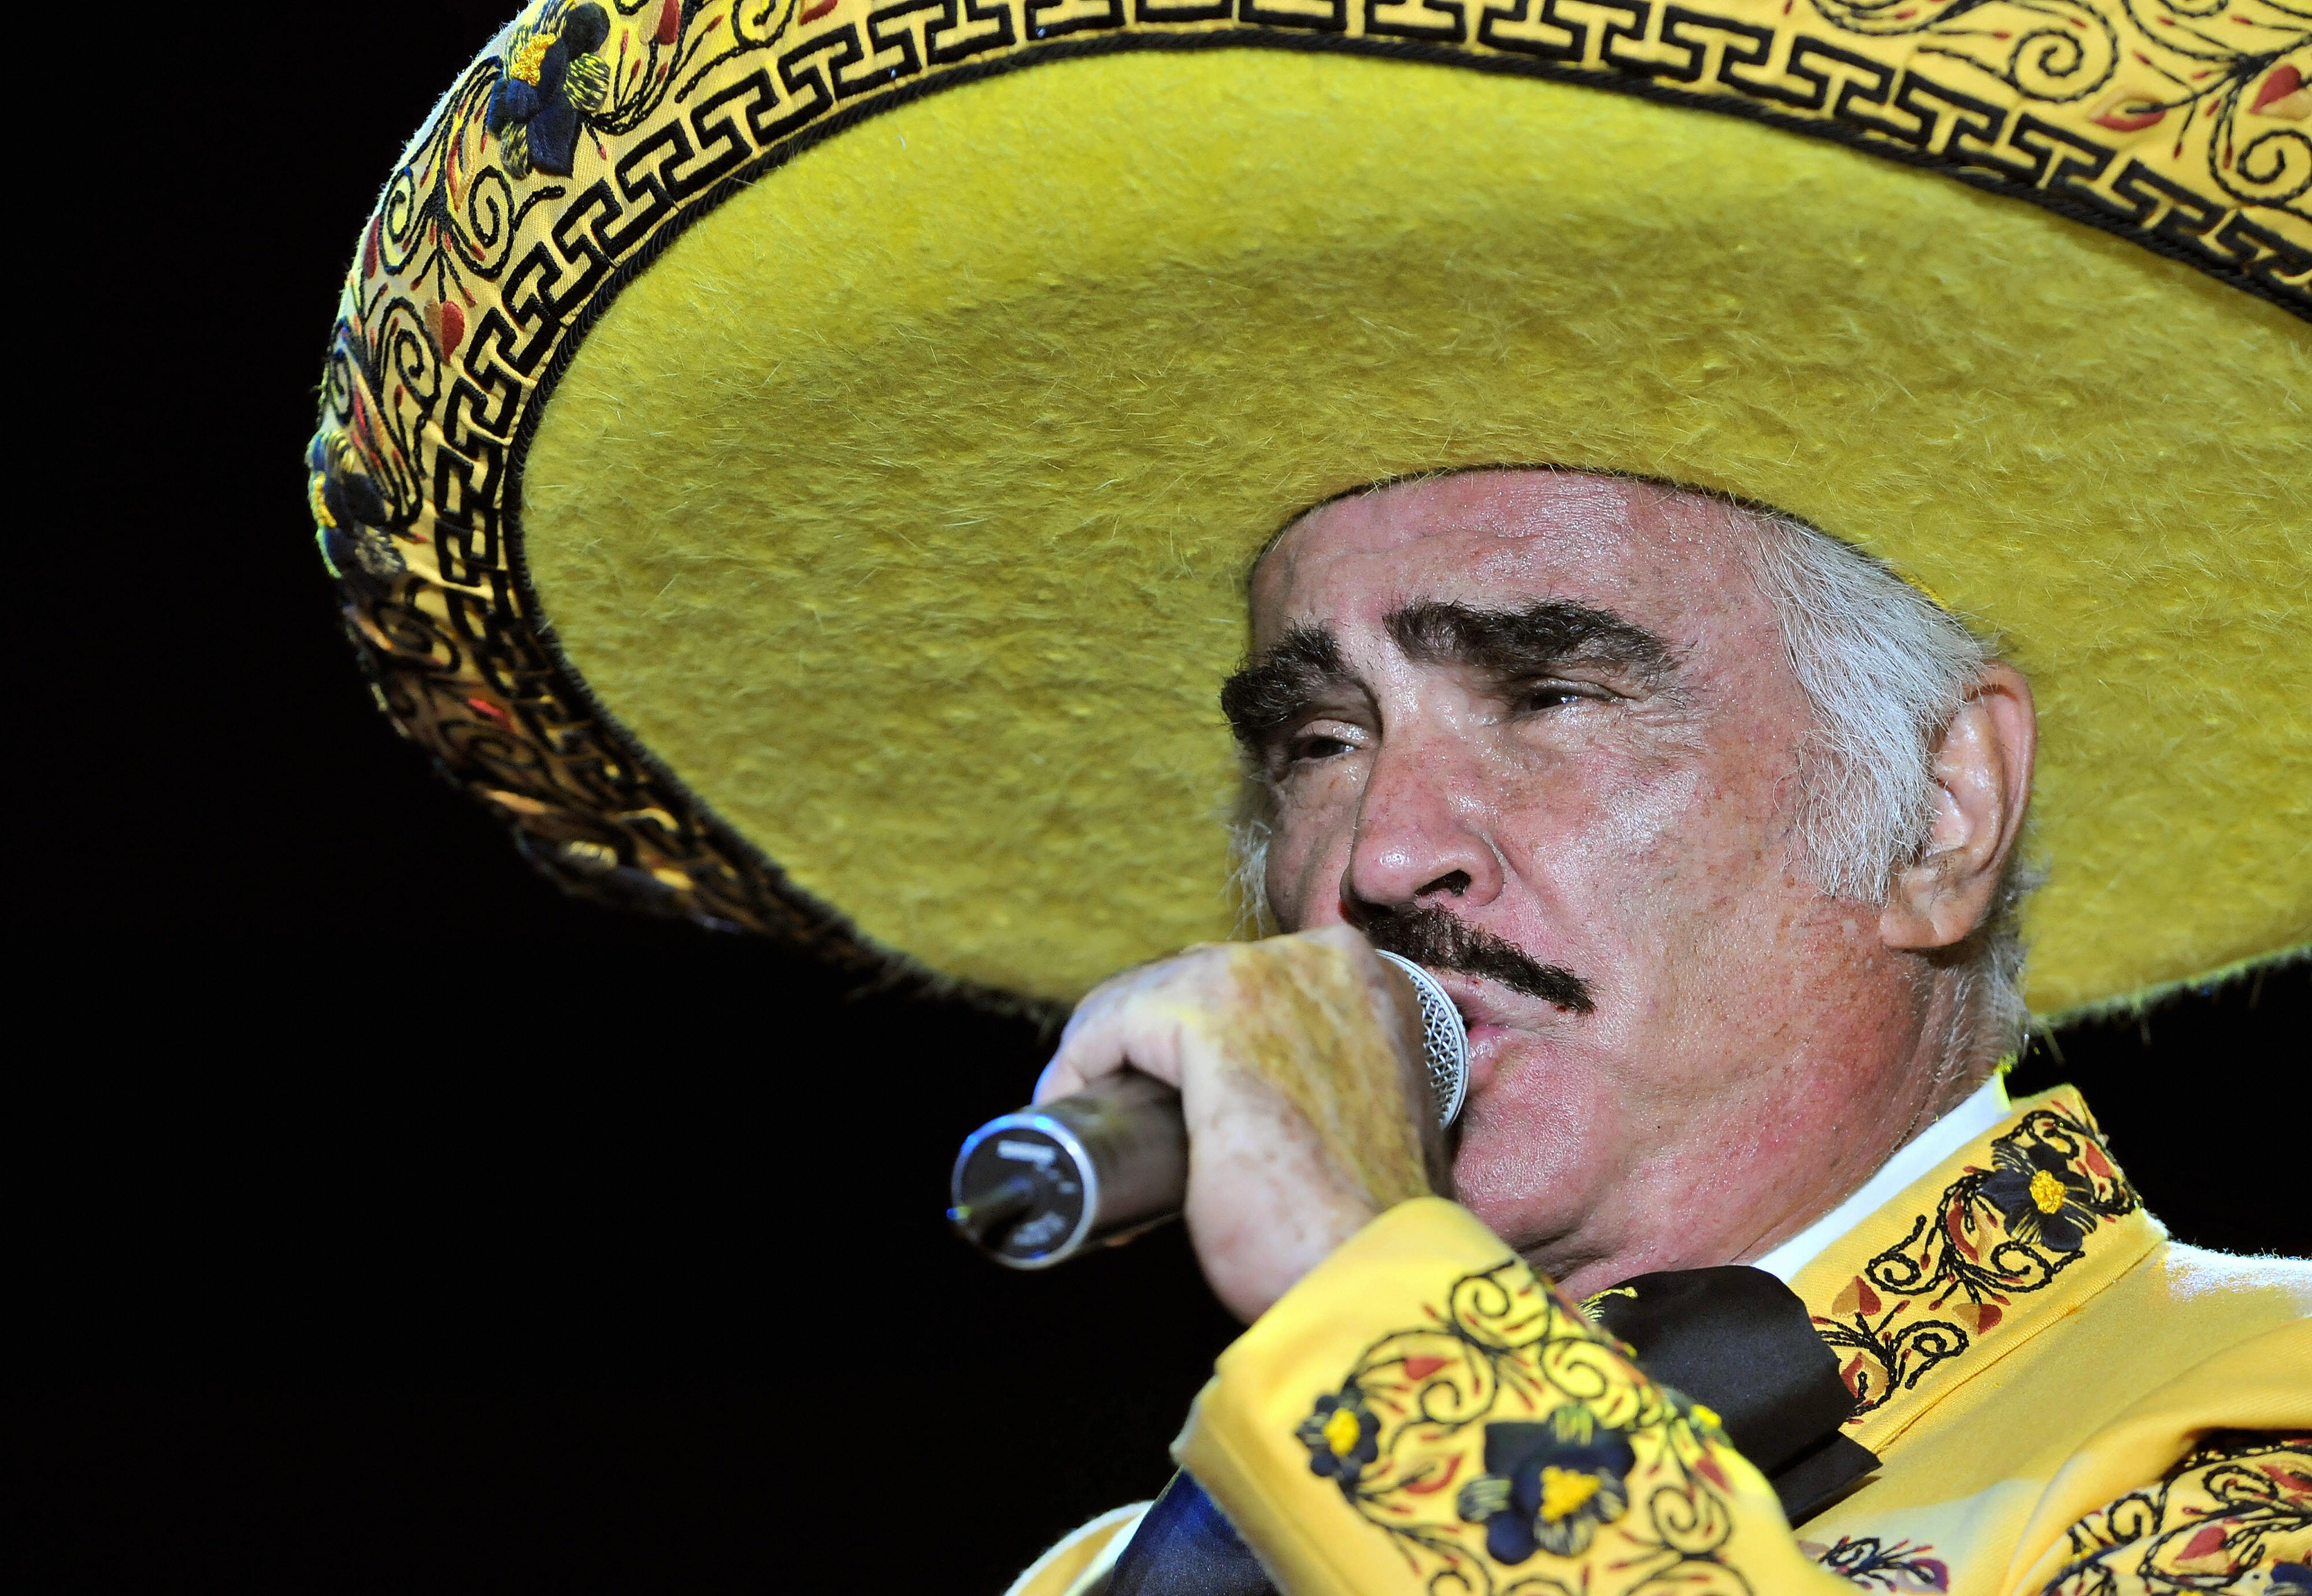 Mexican icon Vicente Fernandez refused liver transplant, fearing gay donor